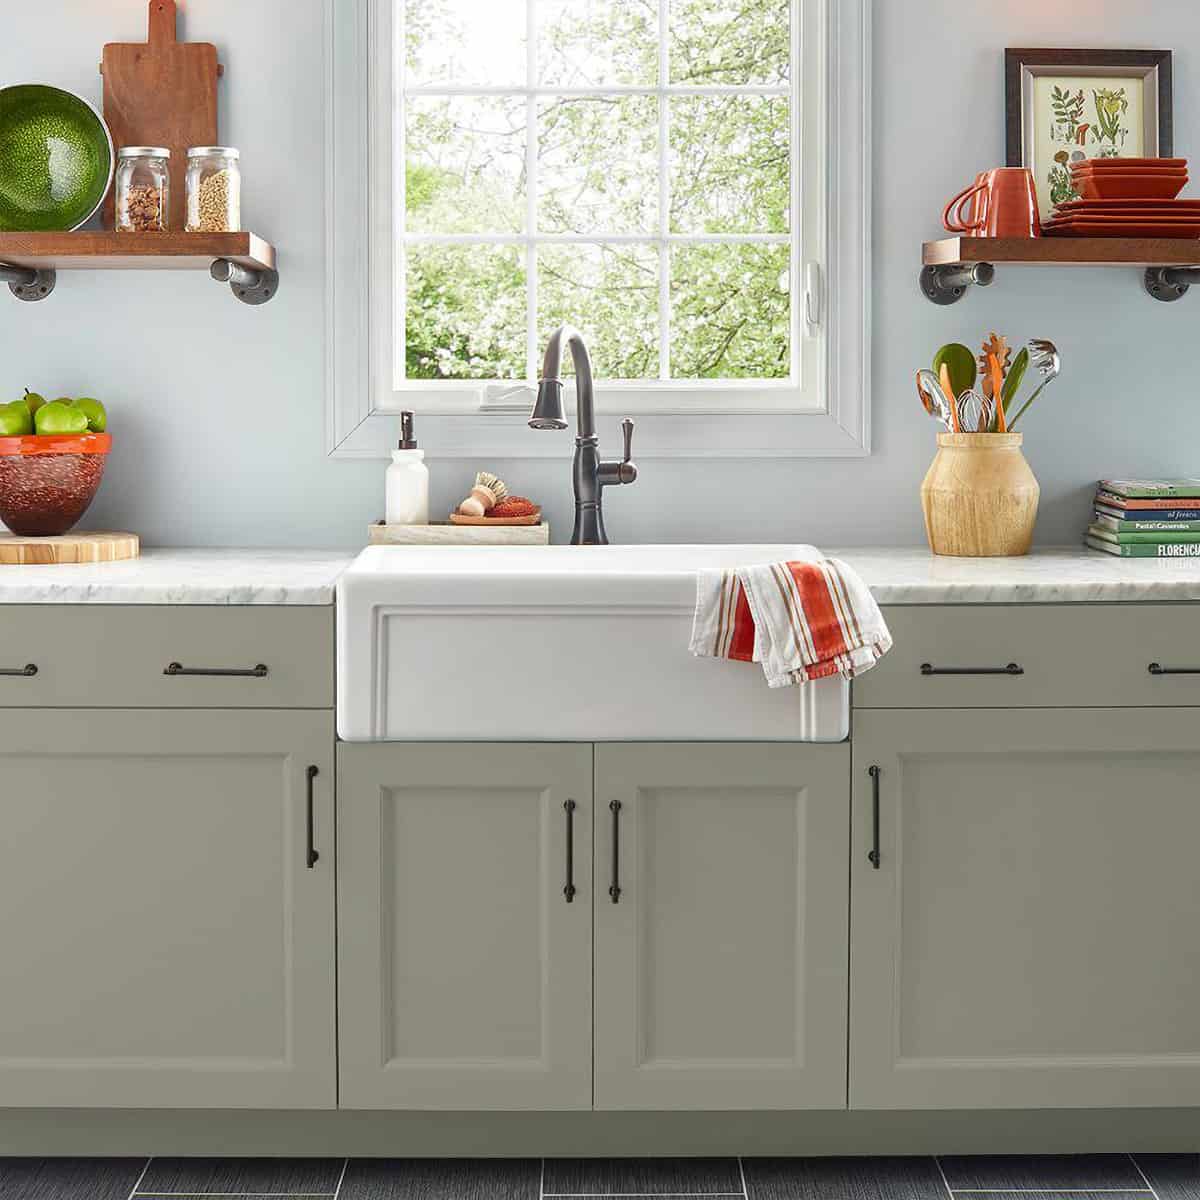 Woodland sage kitchen cabinets with marble countertops in a bright kitchen.